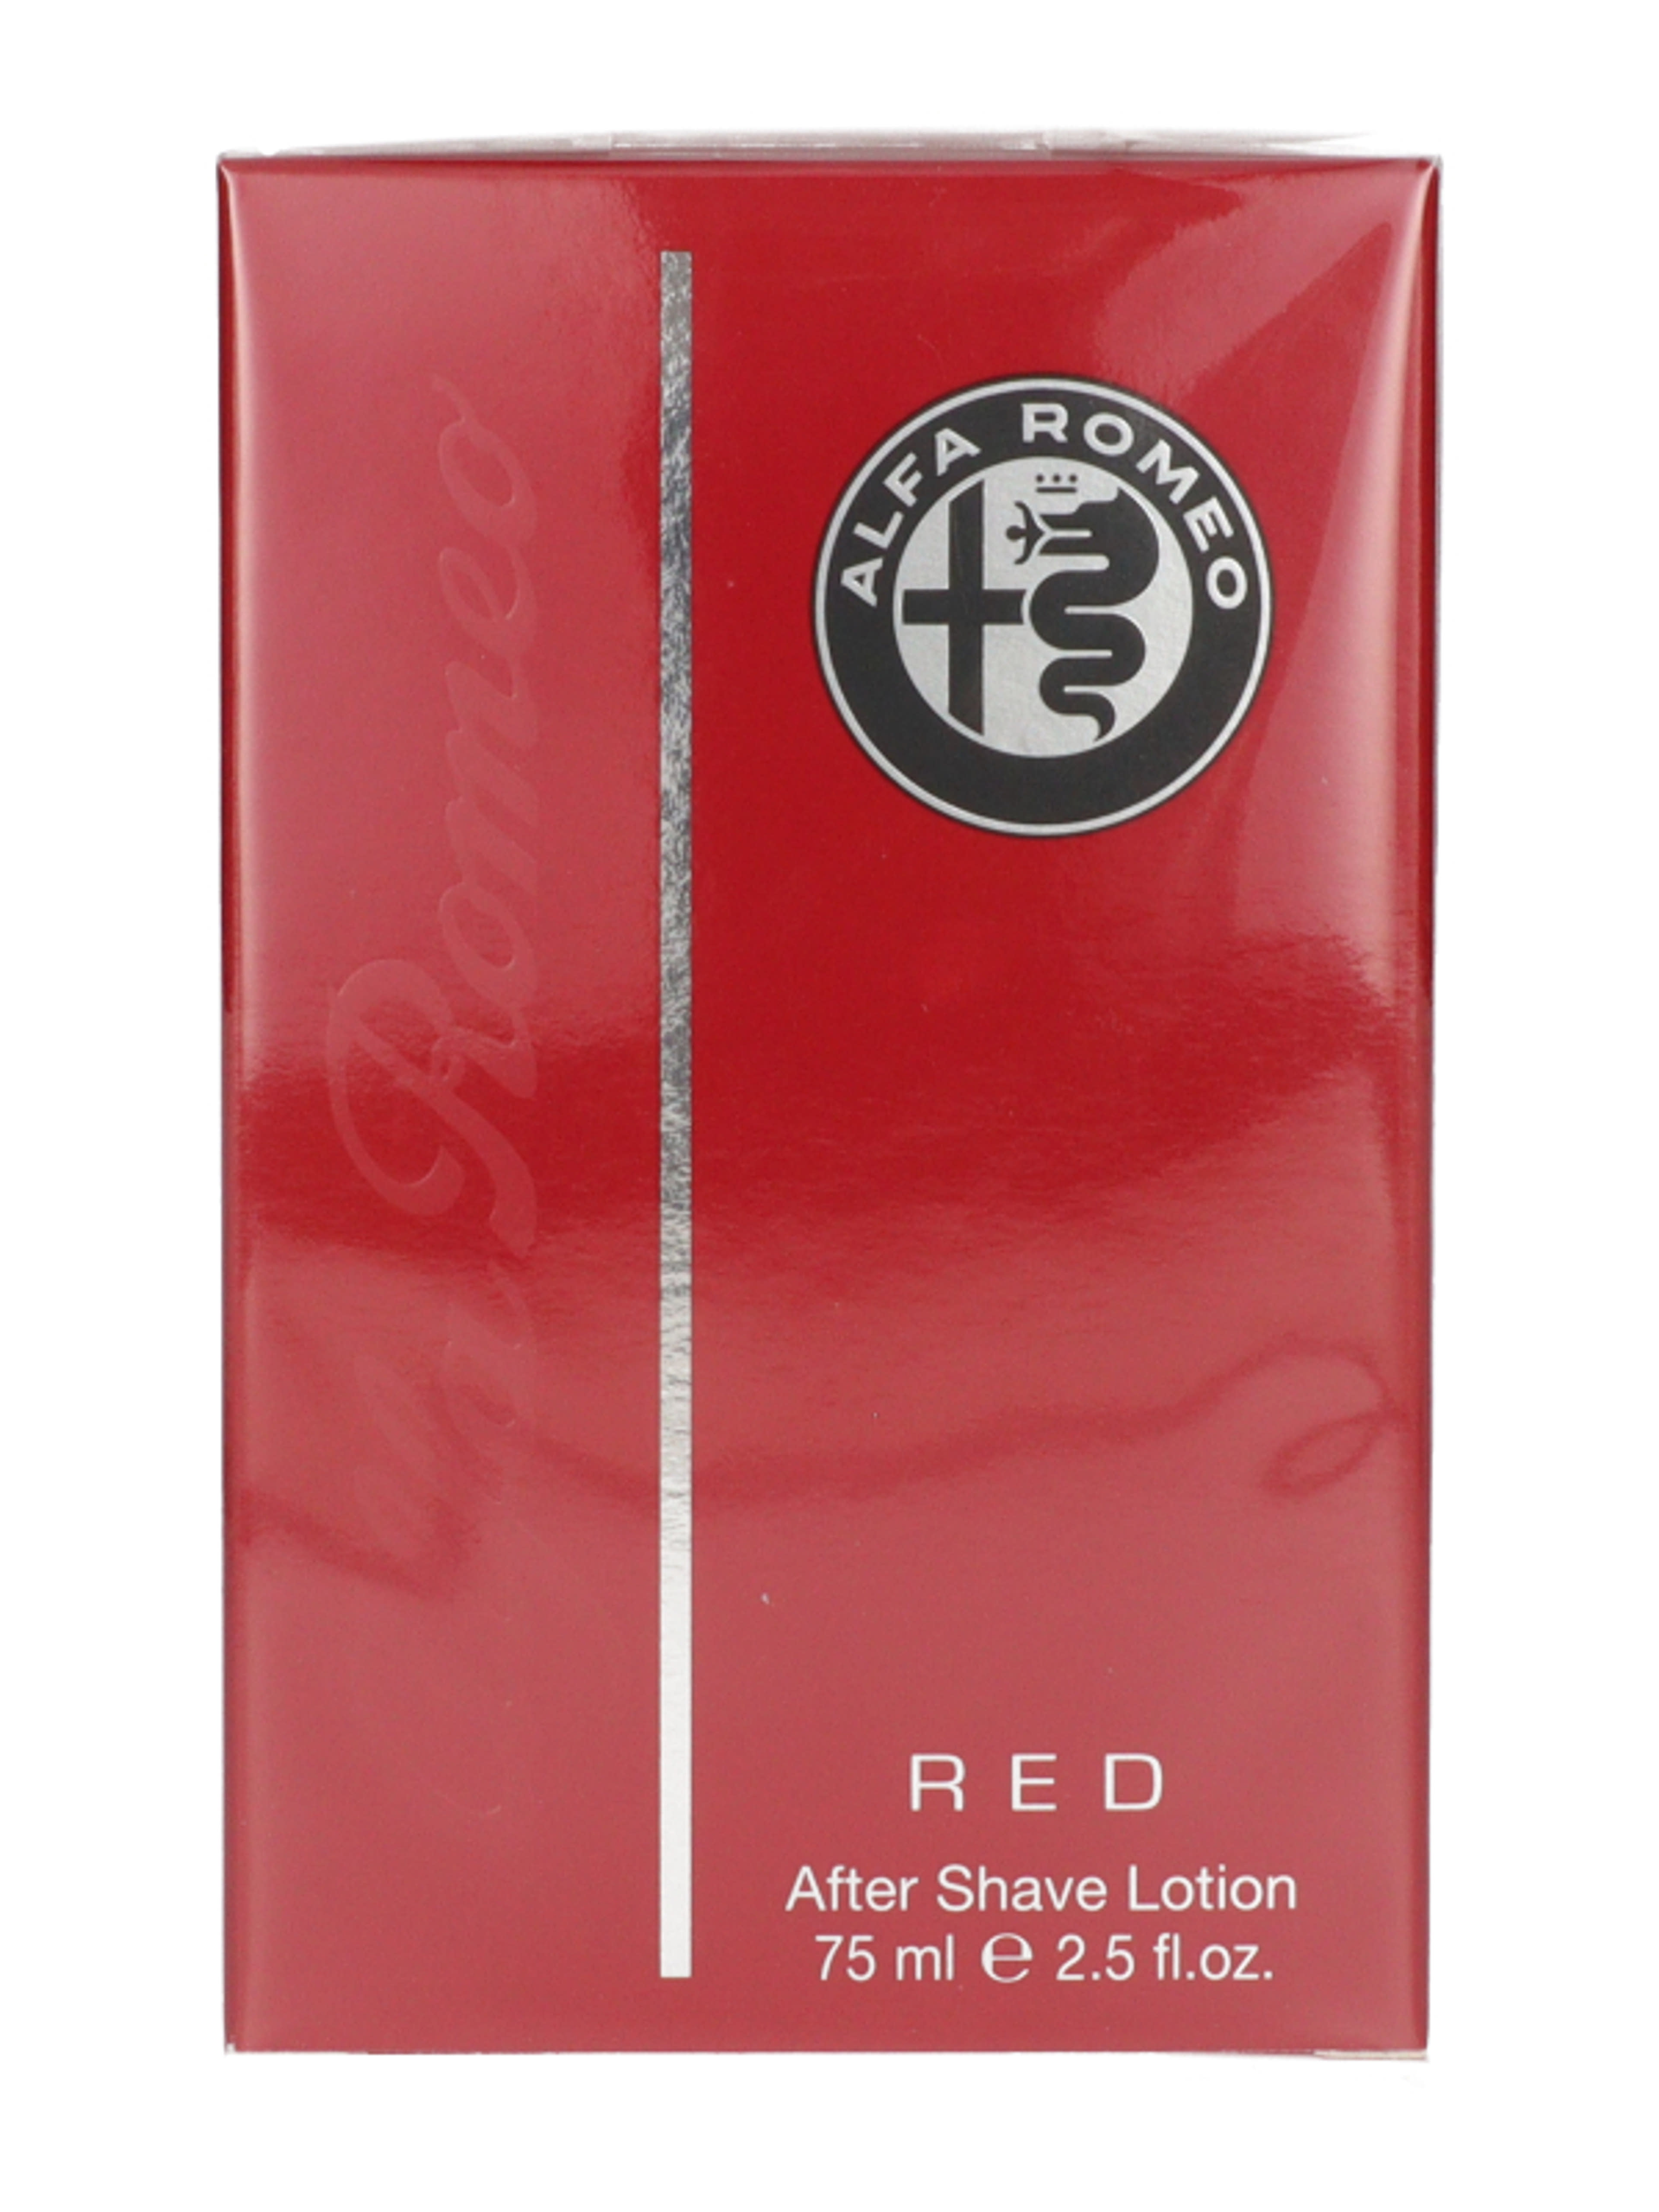 Alfa Romeo After Shave /red - 75 ml-1